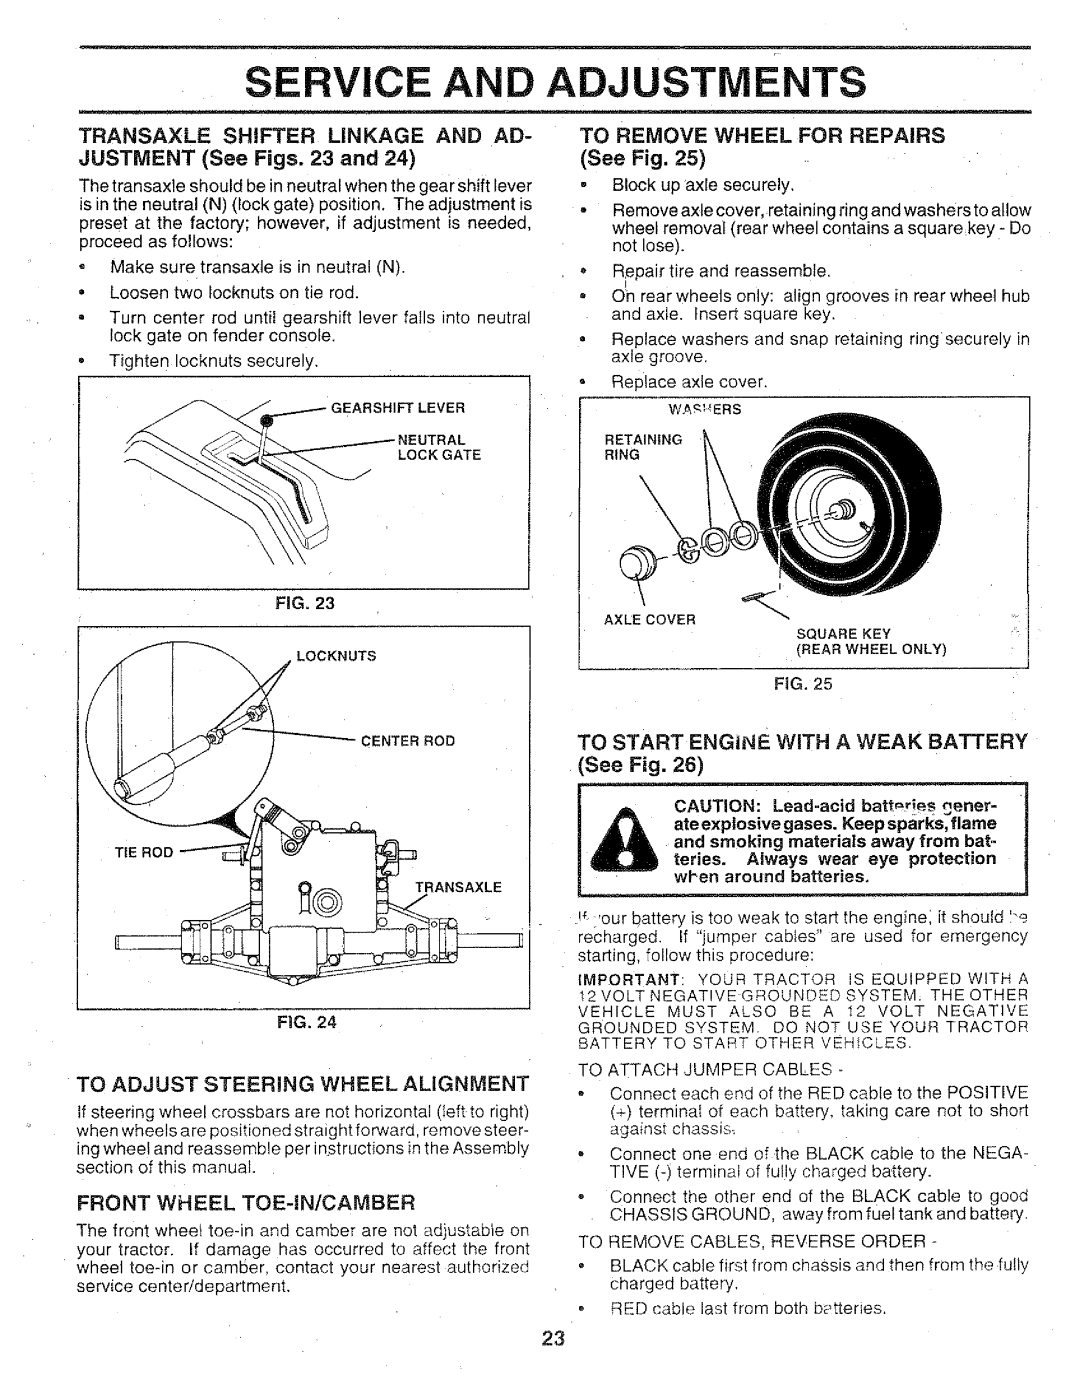 Sears 917.25147 owner manual Rvice And Adjustments, Transaxle Shifter Linkage And Ad, JUSTMENT See Figs. 23 and 